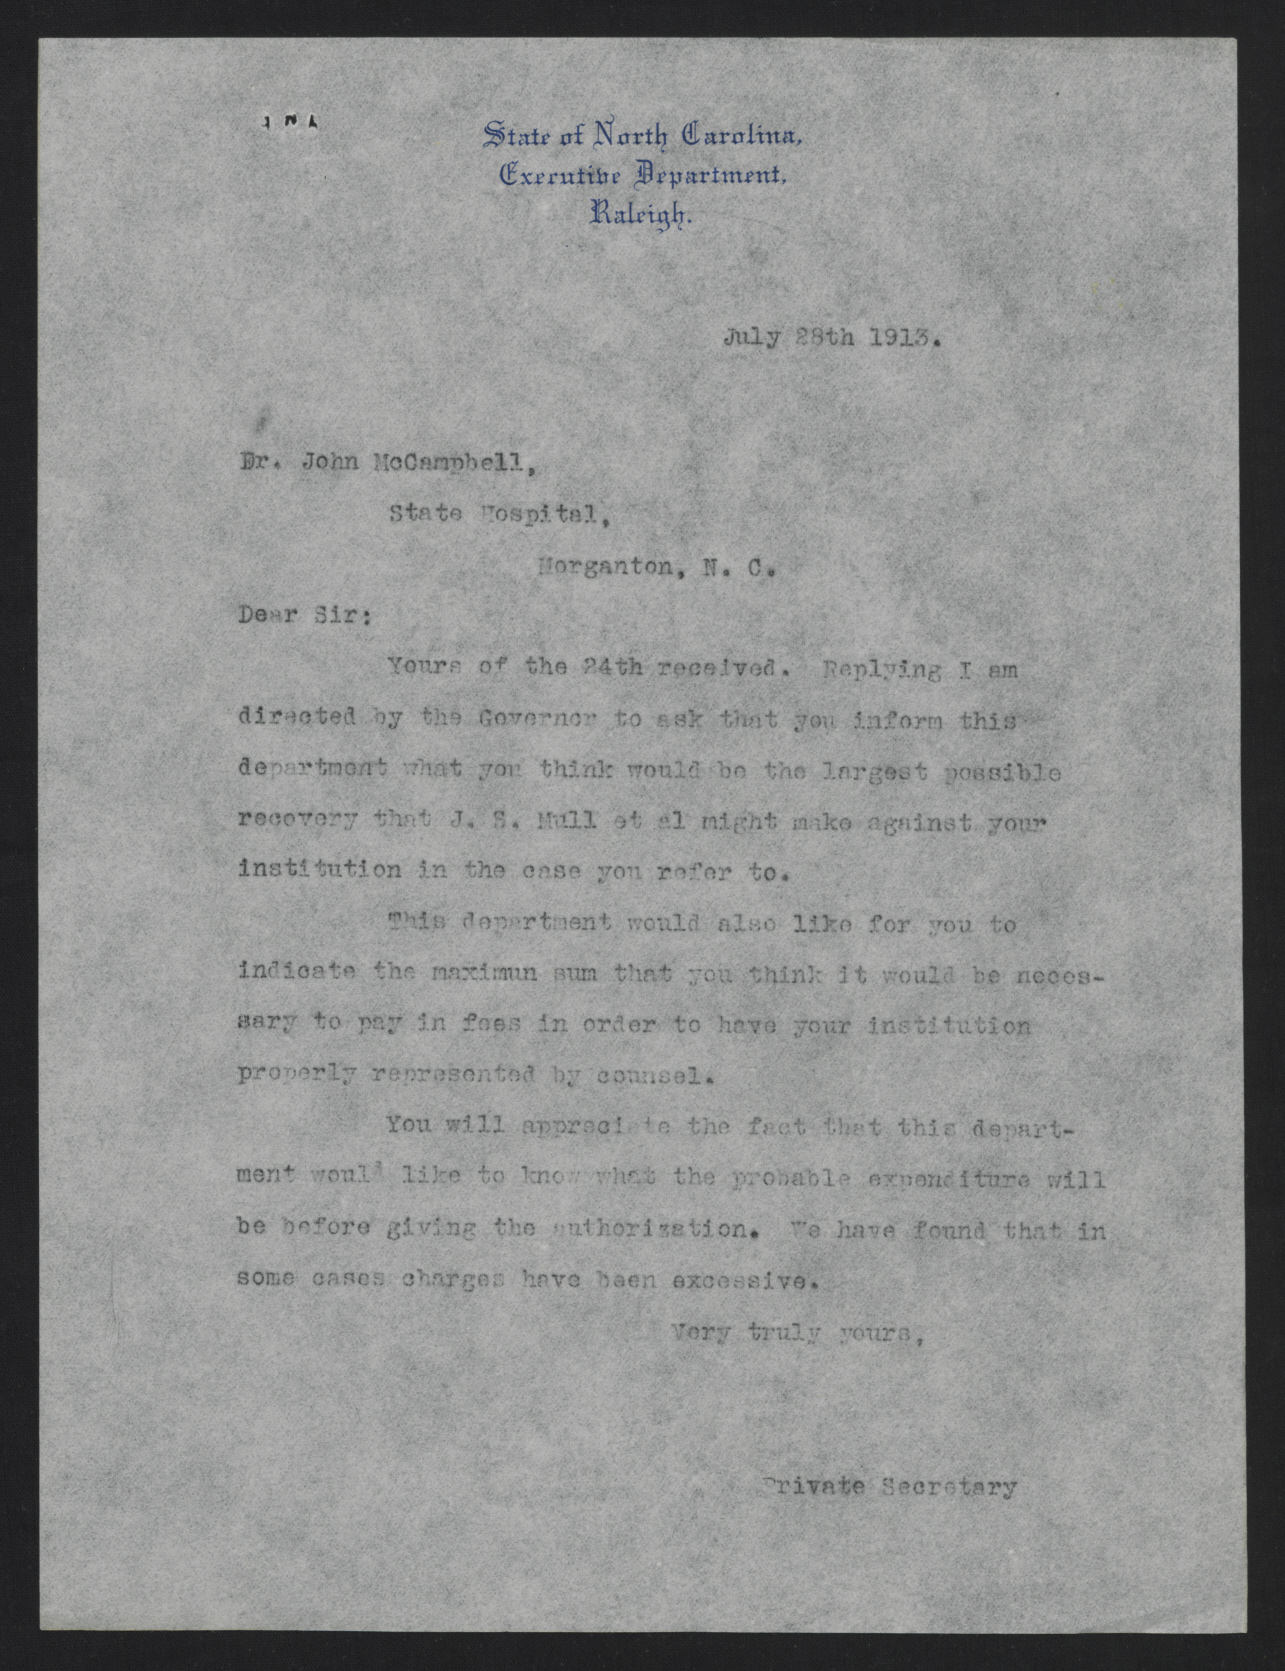 Letter from Kerr to McCampbell, July 28, 1913